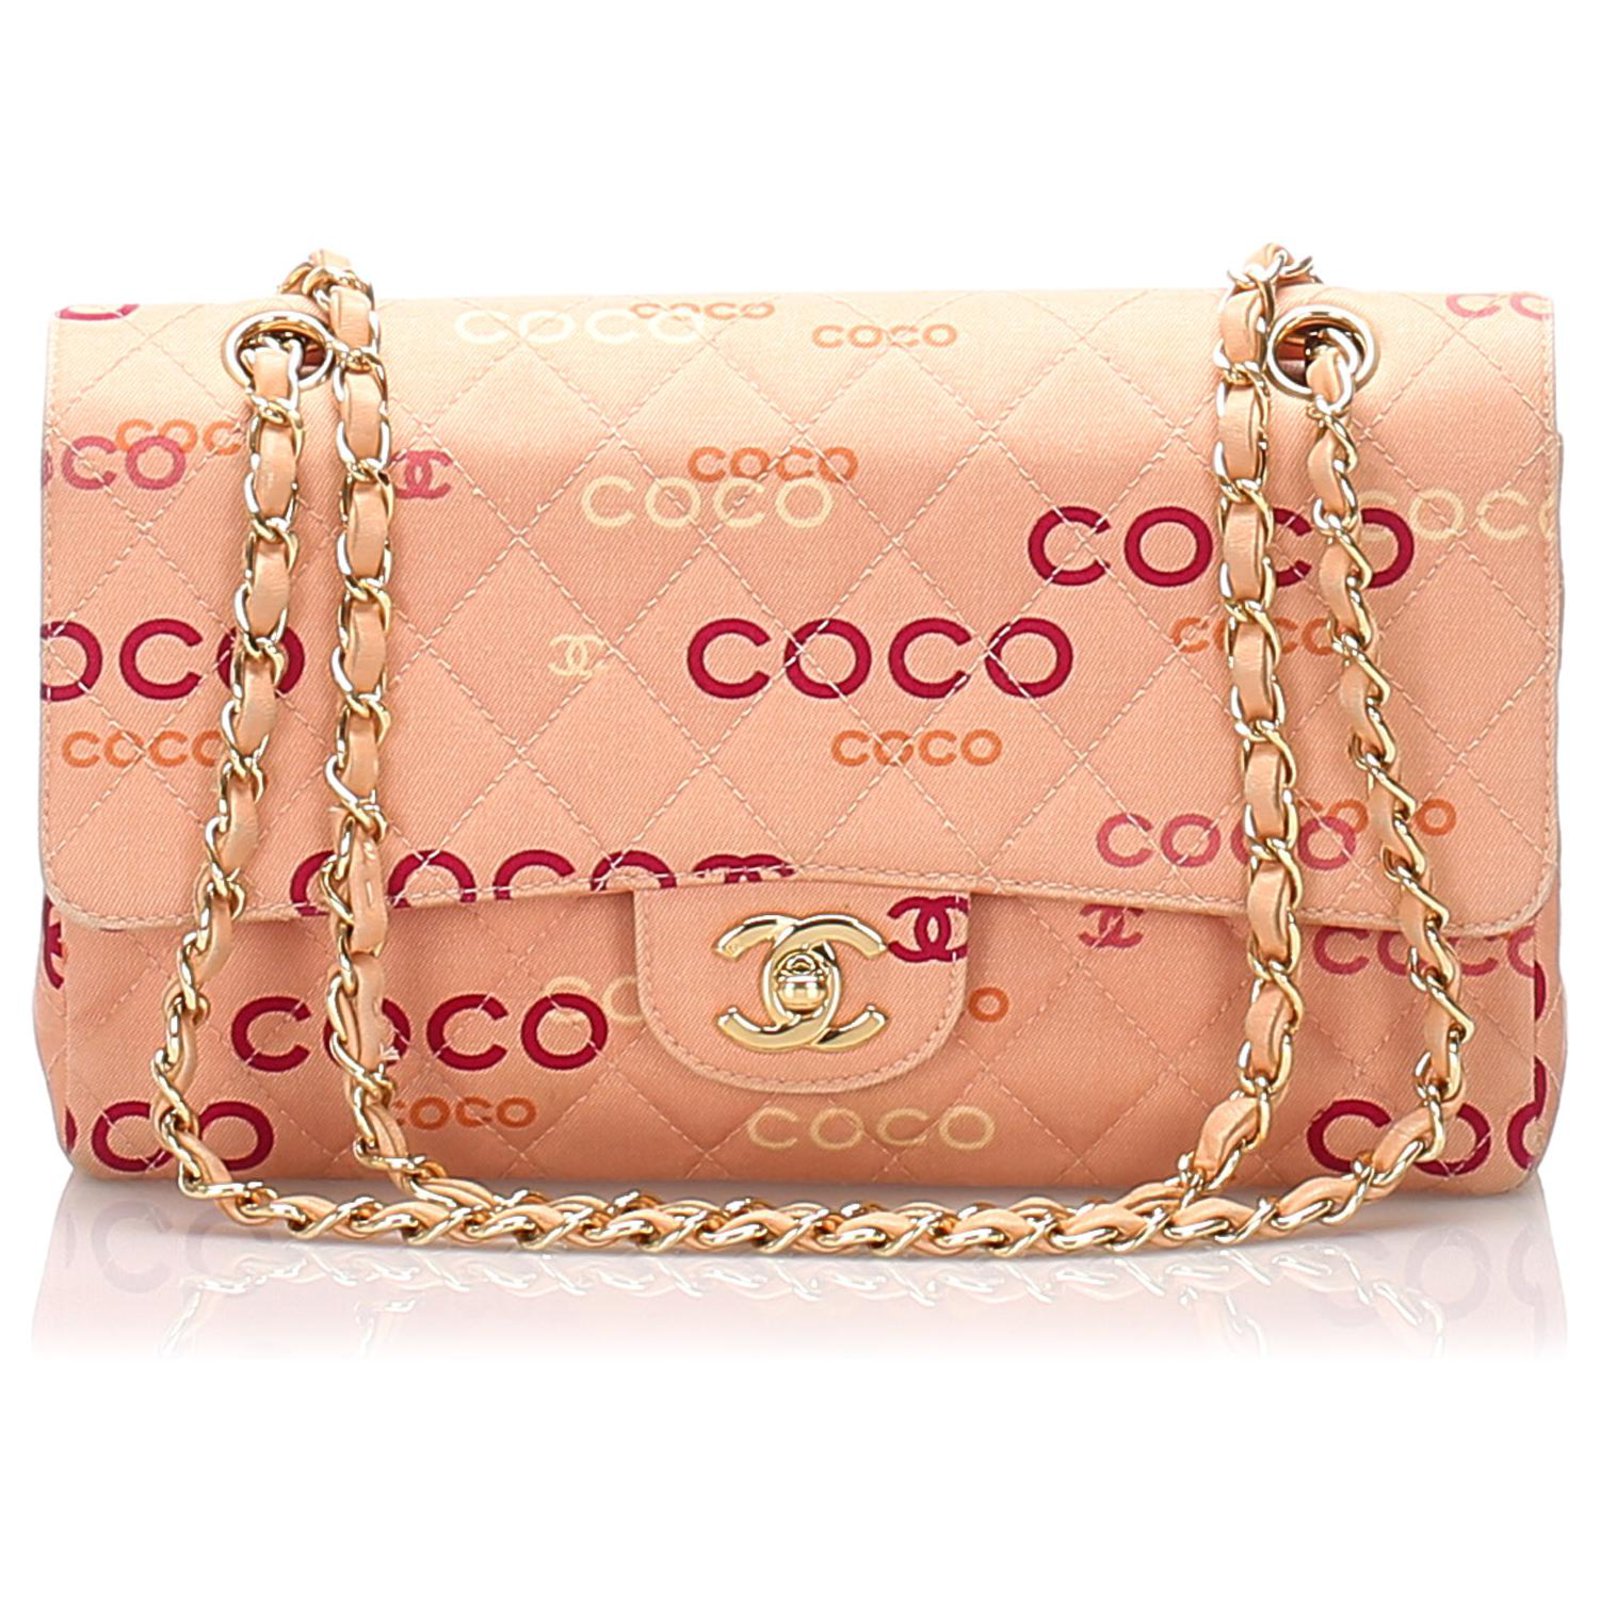 Chanel Pink Medium Coco Classic lined Flap Bag Multiple colors